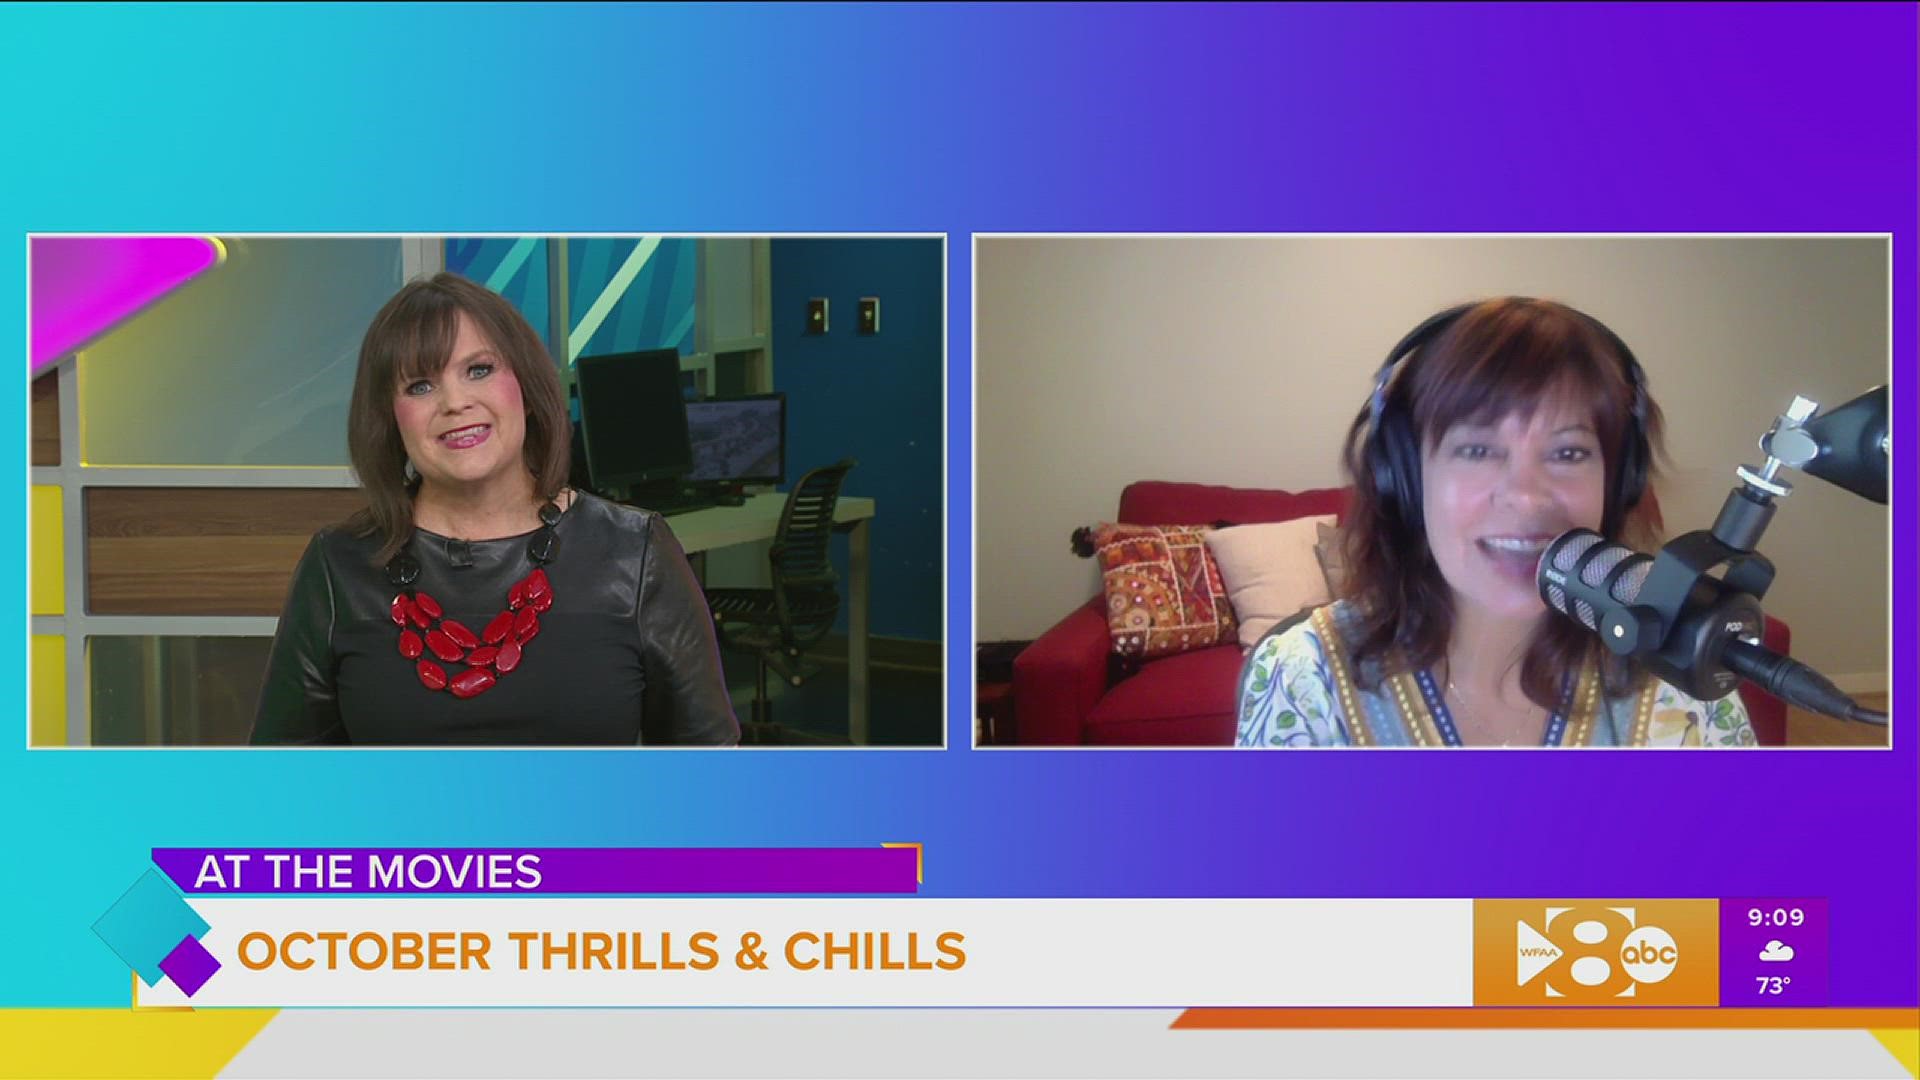 Movie enthusiast Julie Fisk breaks down the new movies coming to theaters in October